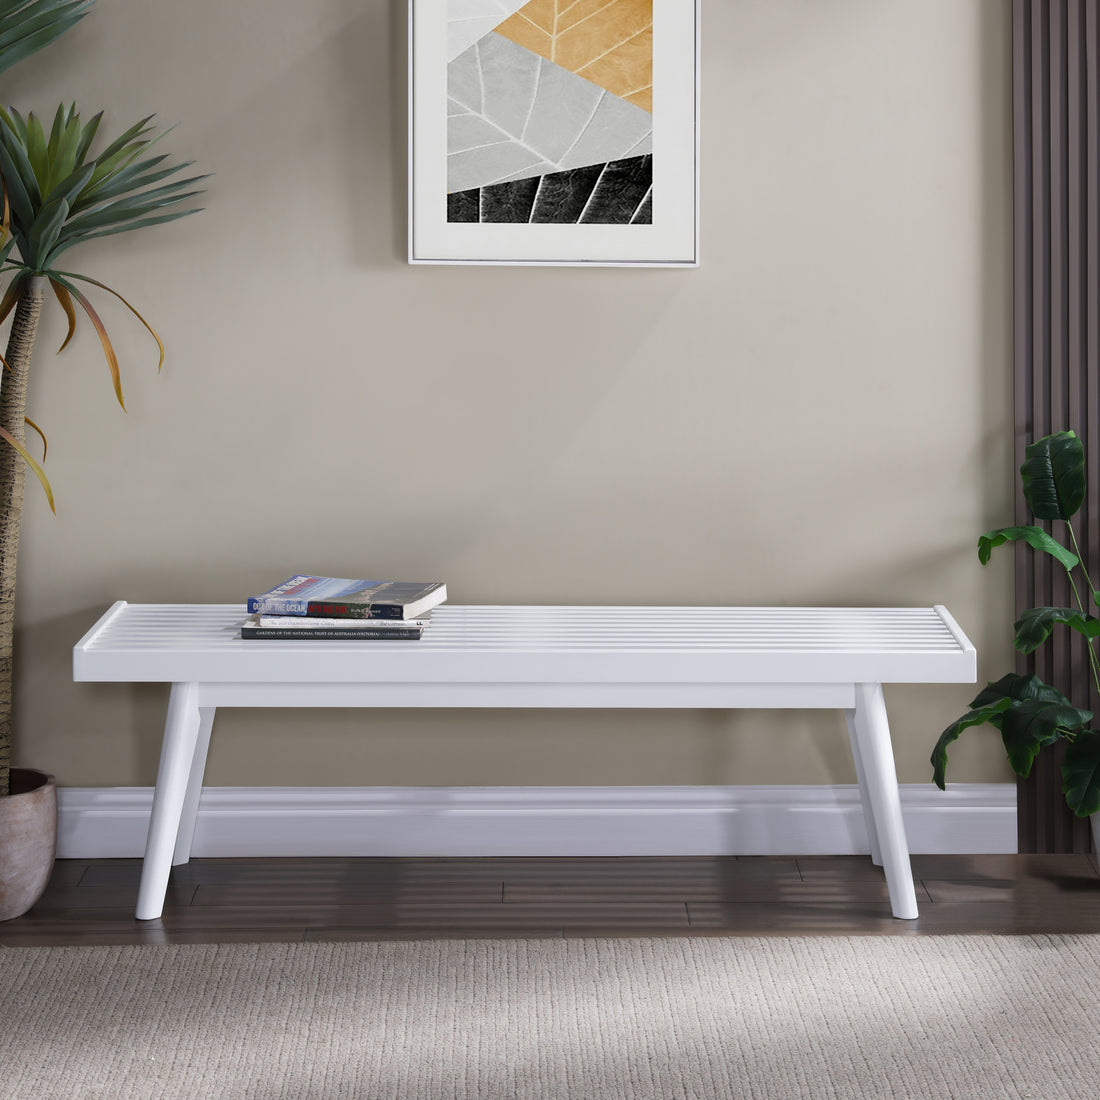 Larwich White Solid Wood Slatted Bench